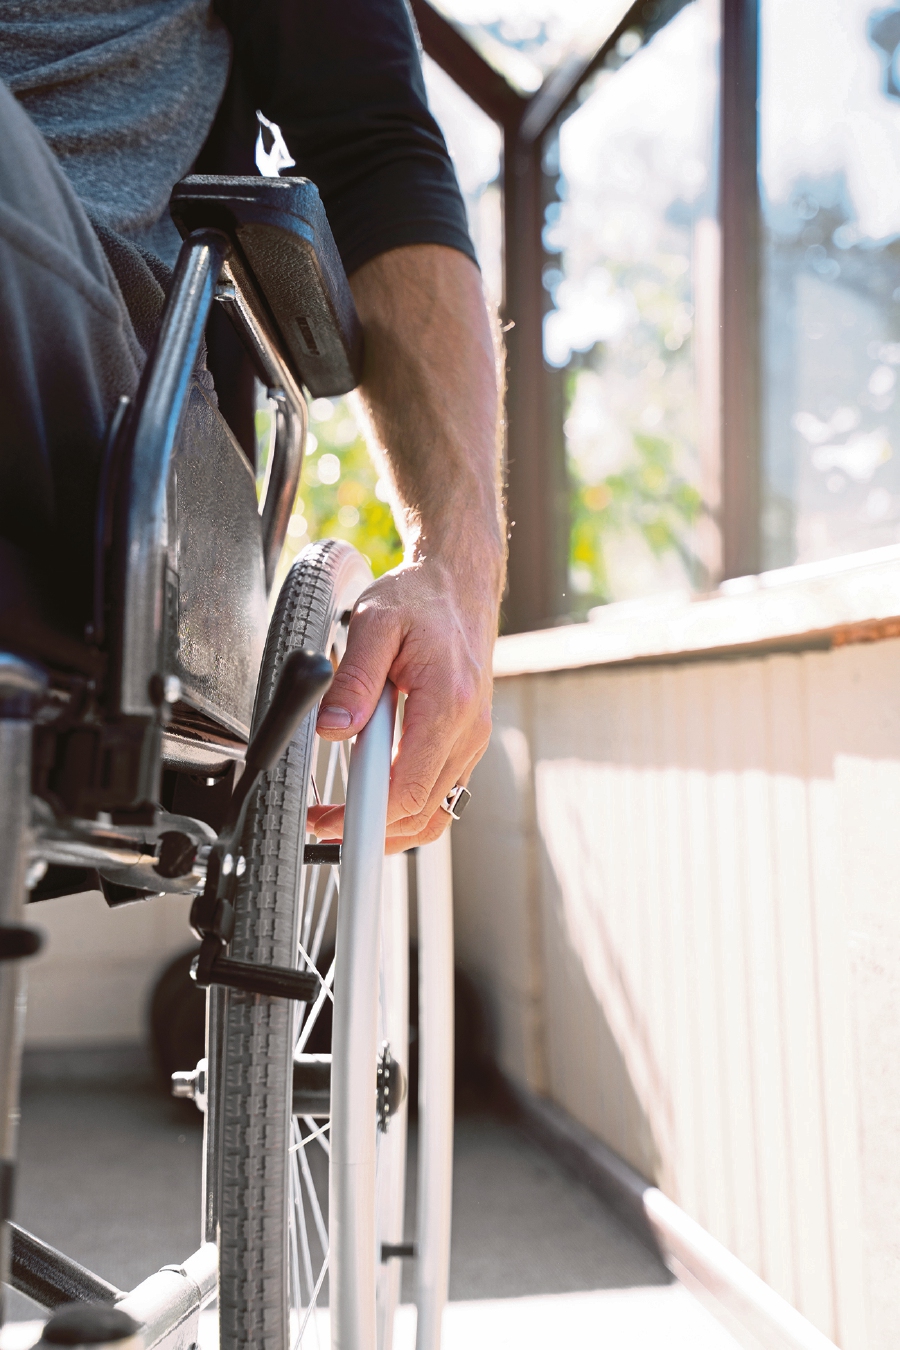 The important goal when treating multiple sclerosis is to reduce disease activity as soon as possible to slow down disability progression. PICTURE CREDIT: Freepik